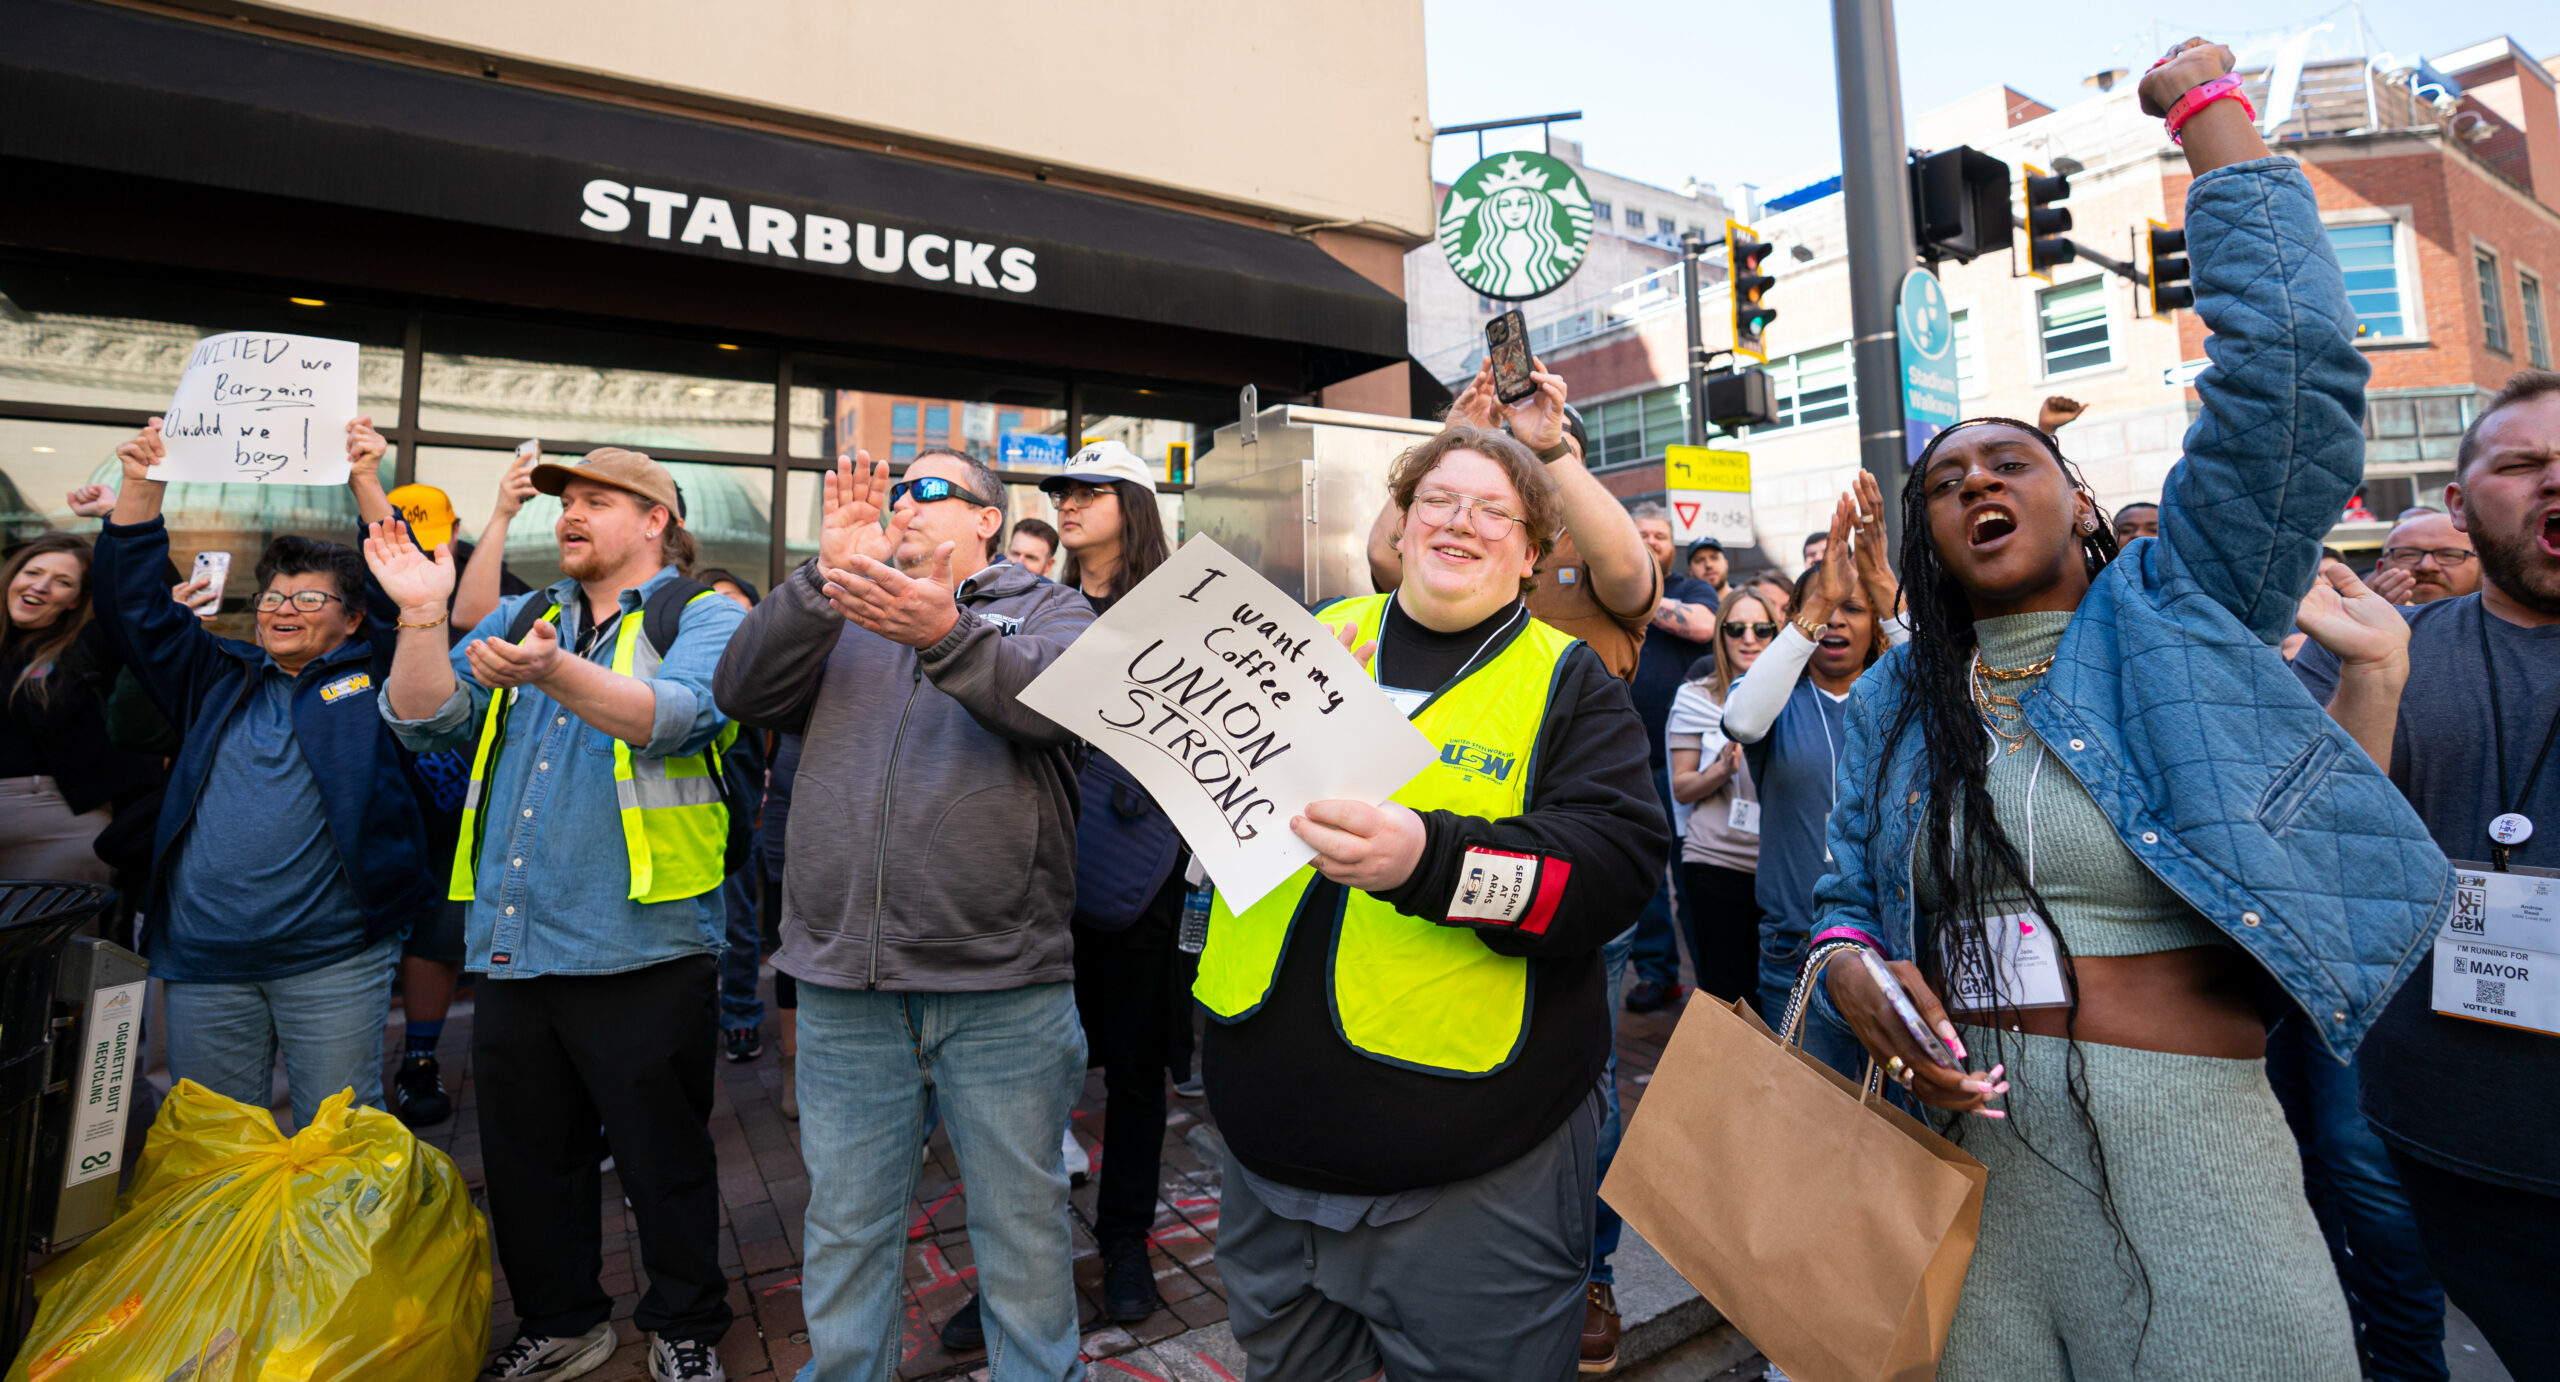 A group of people outside during a rally at a Starbucks coffee shop.